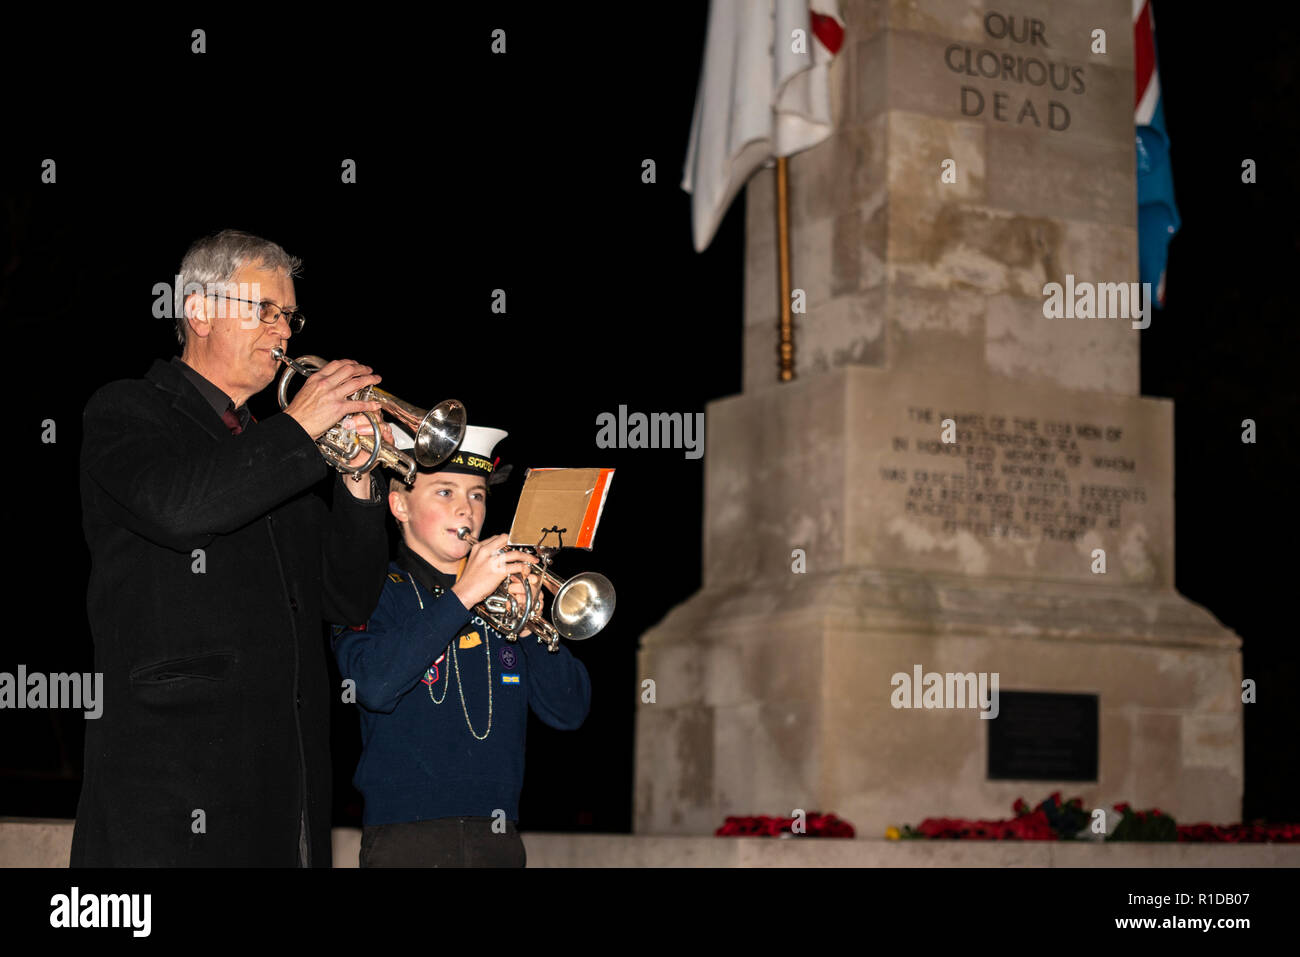 Southend Cenotaph, Clifftown Parade, Southend on Sea, Essex, UK. Buglers performed The Last Post at 18:55 before the lighting of a 'Beacon of Light' at 19:00, an act echoed around the country to symbolise an end to the darkness of war and a return to the light of peace. Buglers were Will Rodgers, 13, of Southend Brass Band and David Hurrell. Armistice Day. Remembrance Sunday. Centenary of the end of World War One, the Great War, the First World War Stock Photo